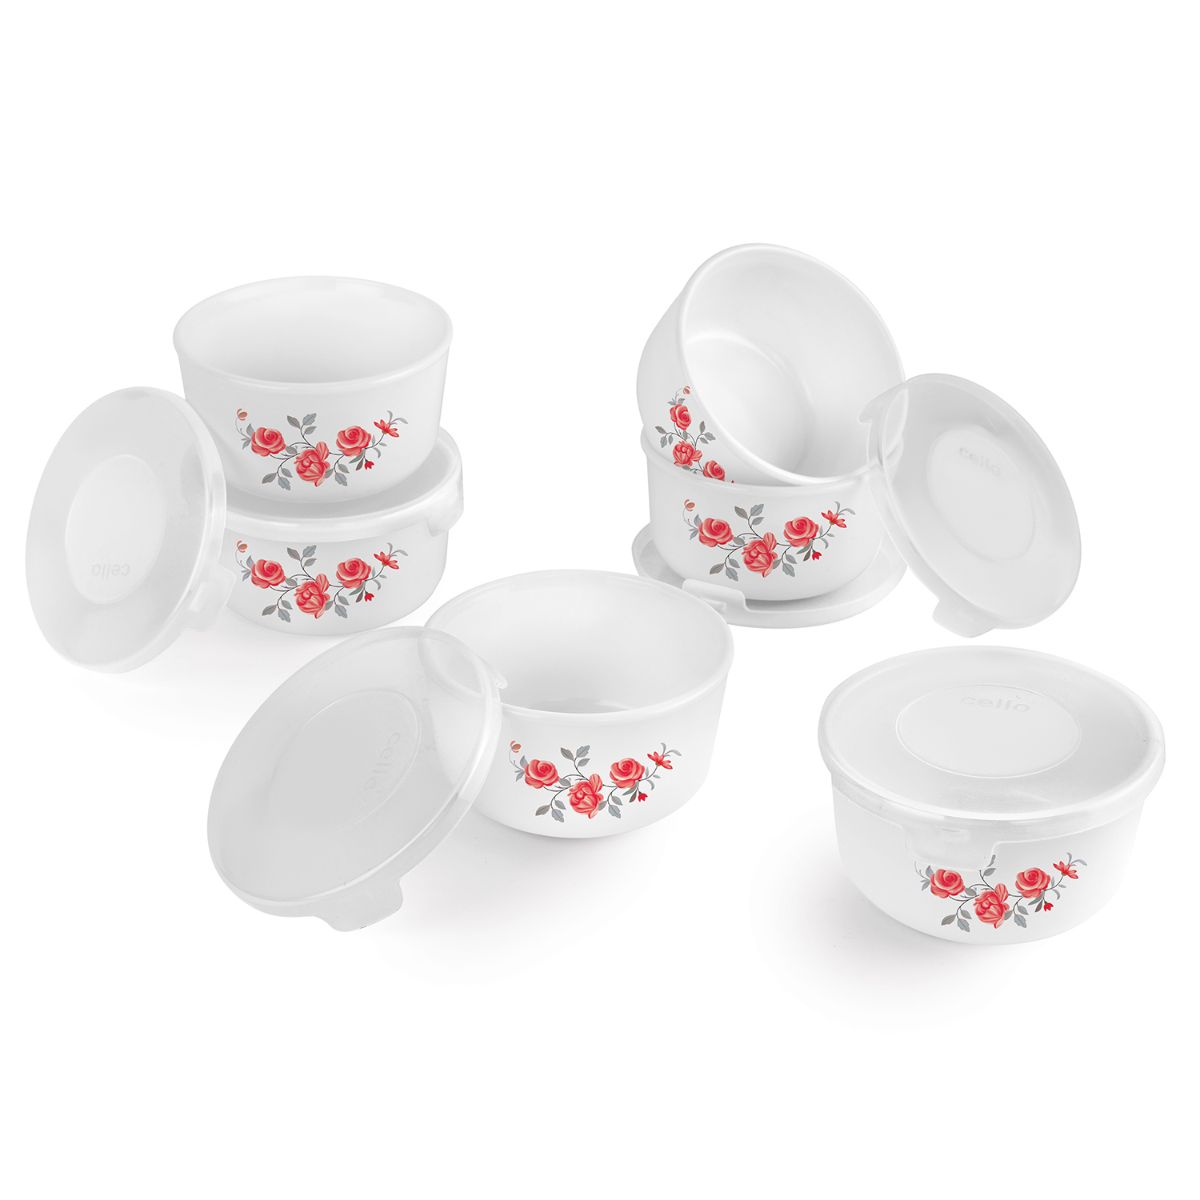 Imperial Series Mini Storage Gift set with lid, 6 Pieces Red Rose Fantasy / 6 Pieces